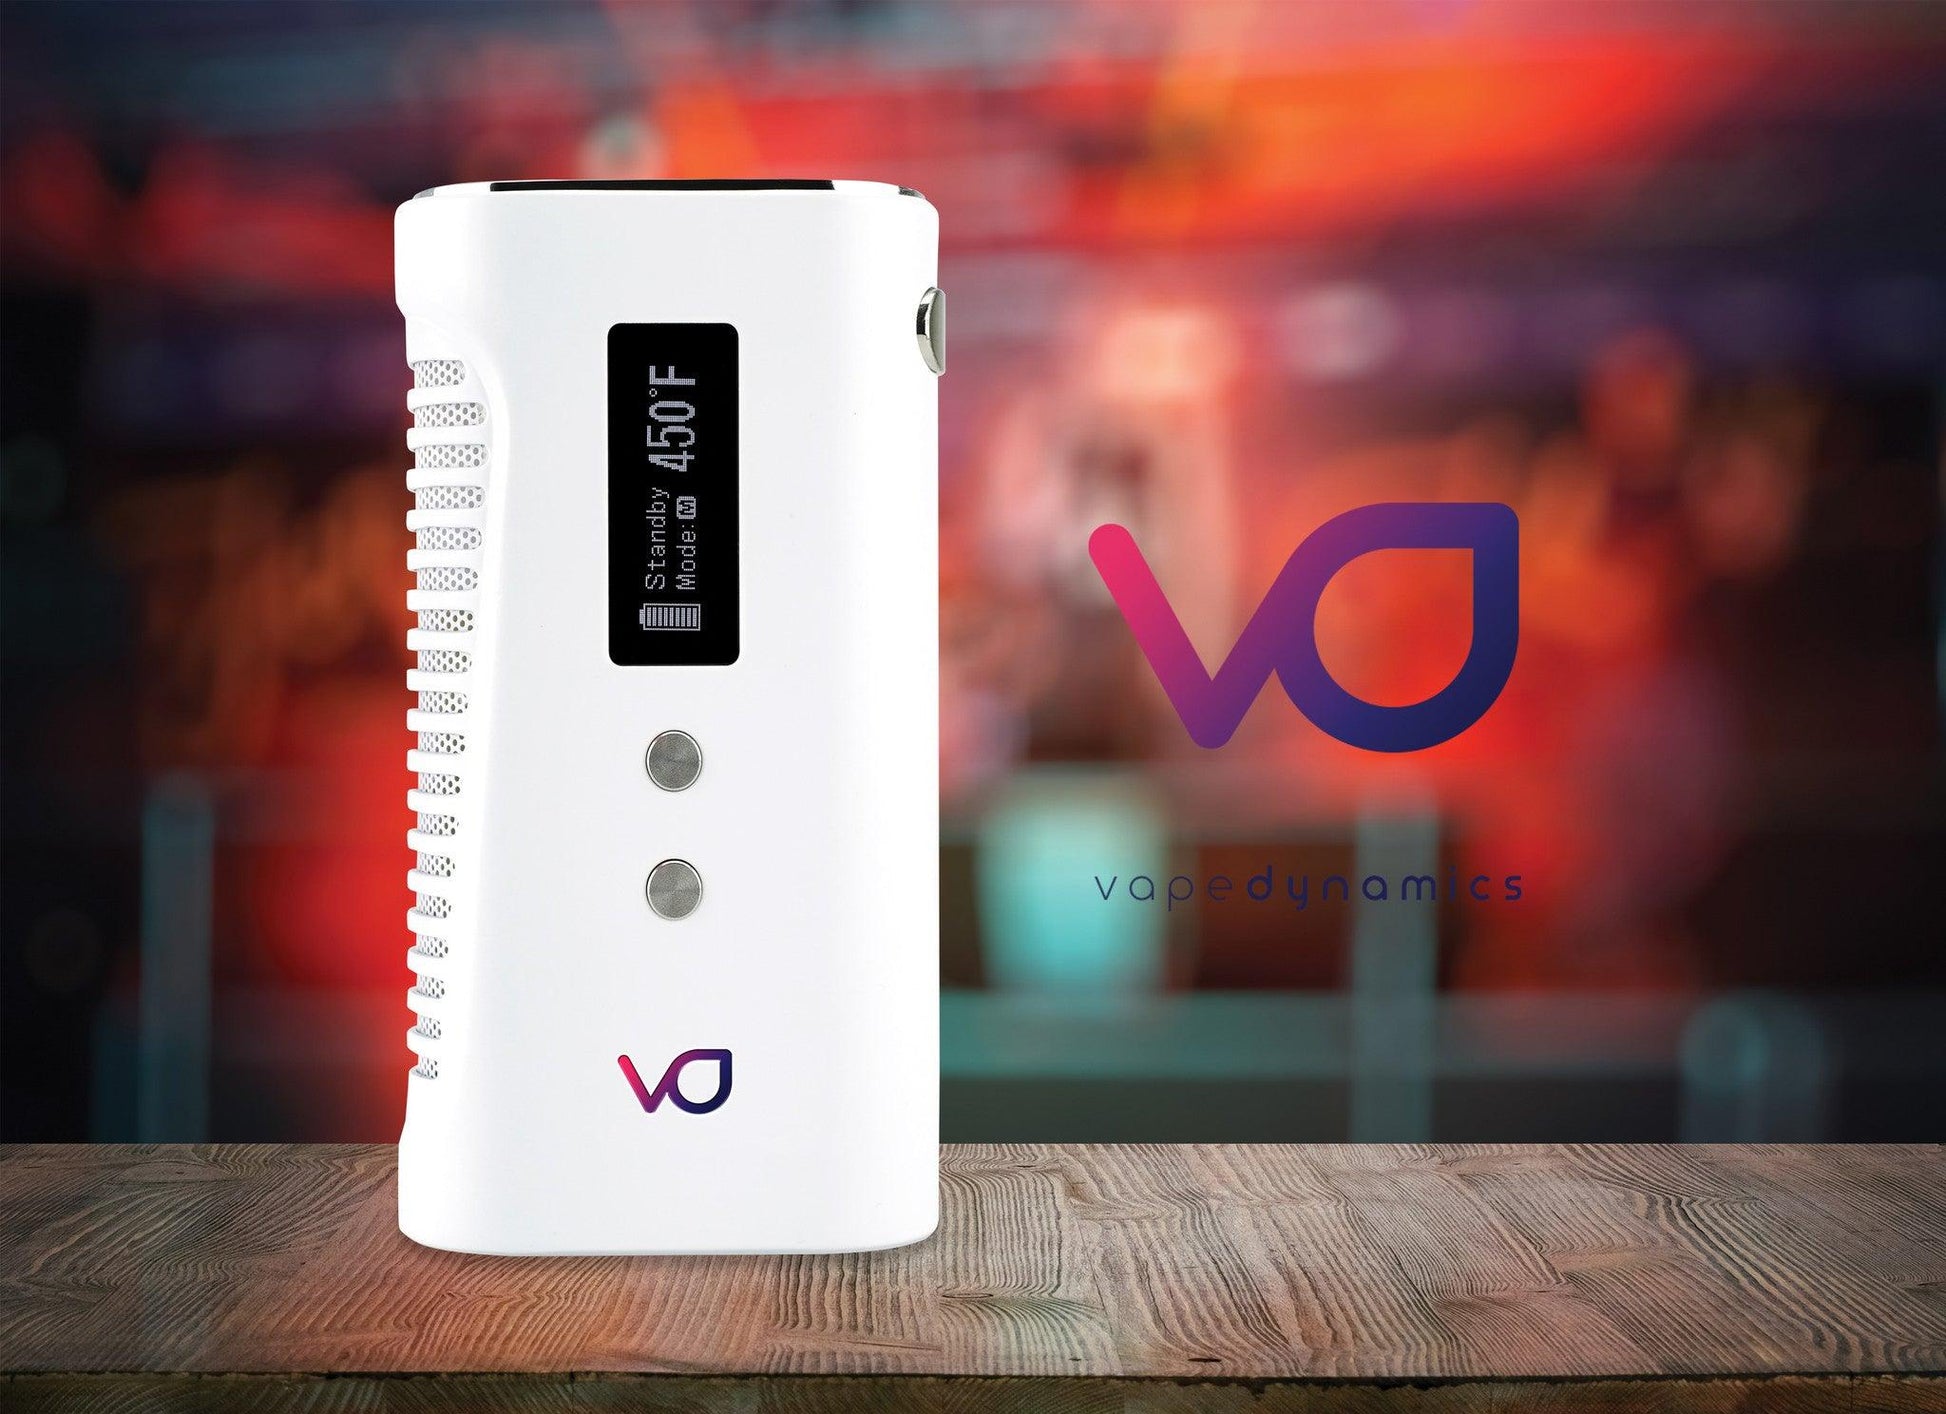 Vaporizer - Photography and Web Design - Los Angeles, US based Shopify Experts Revo Designs